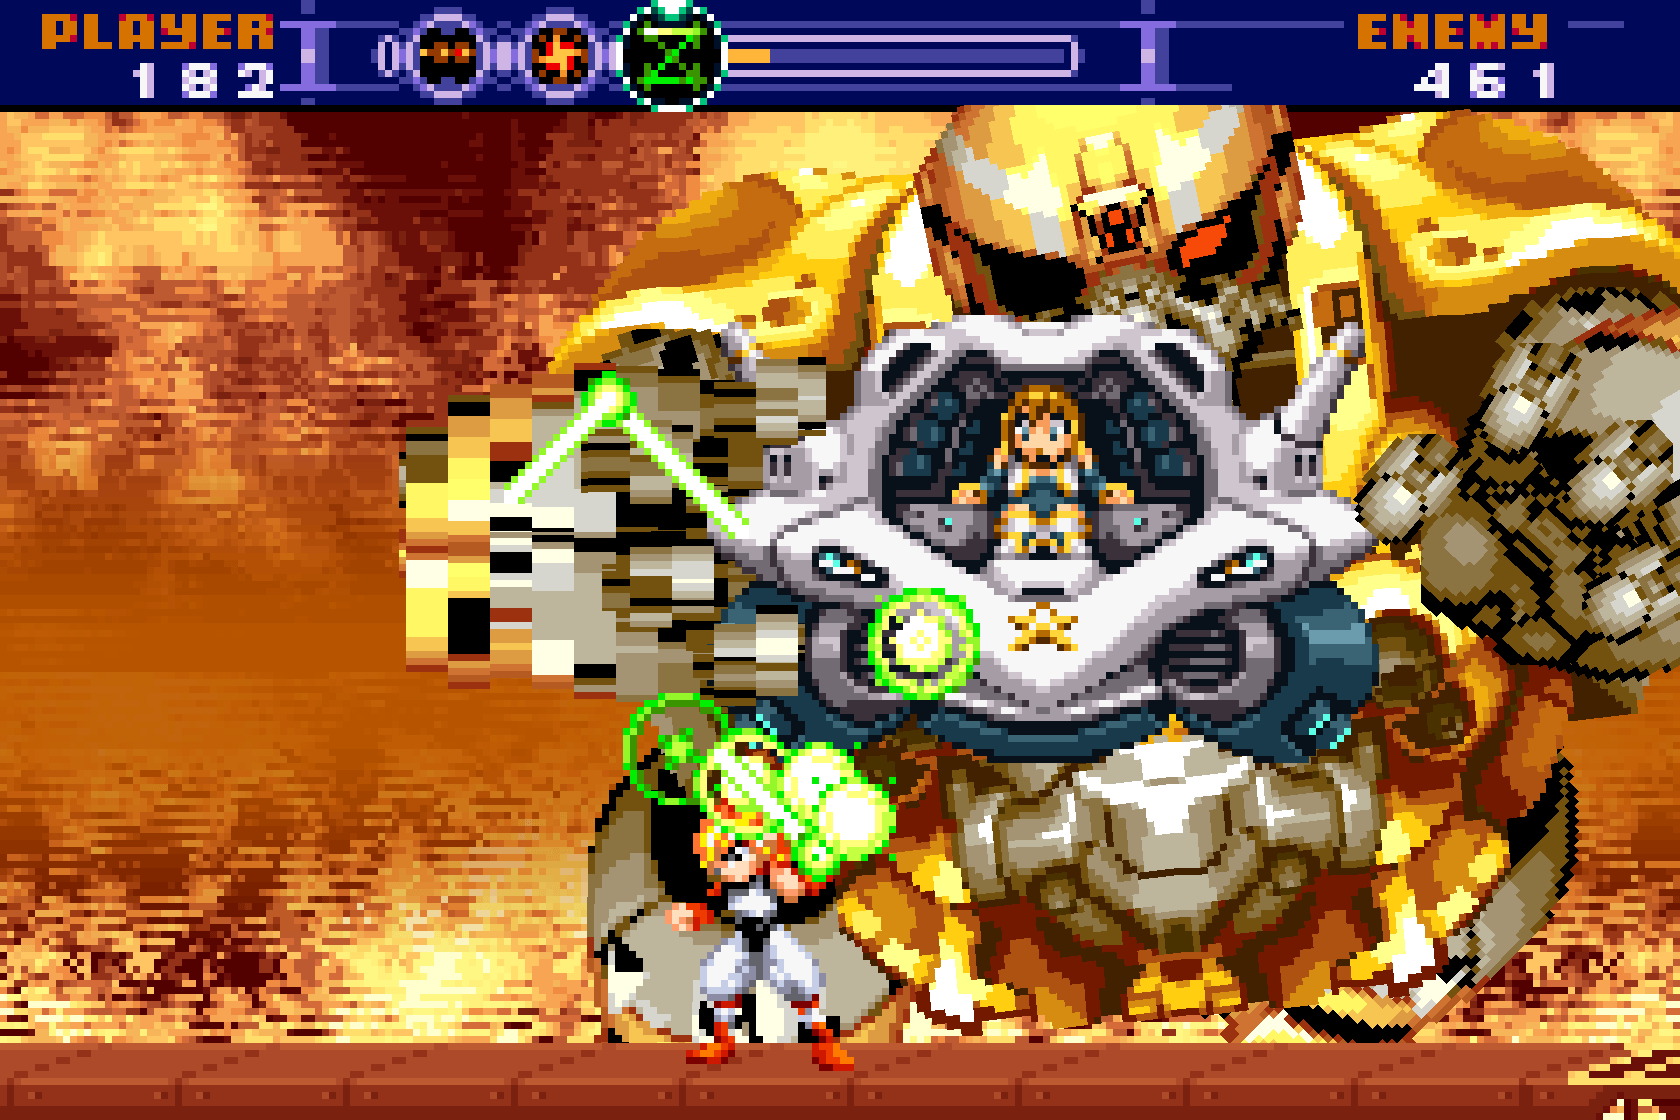 Gunstar Super Heroes uses rotated and mosaic sprites